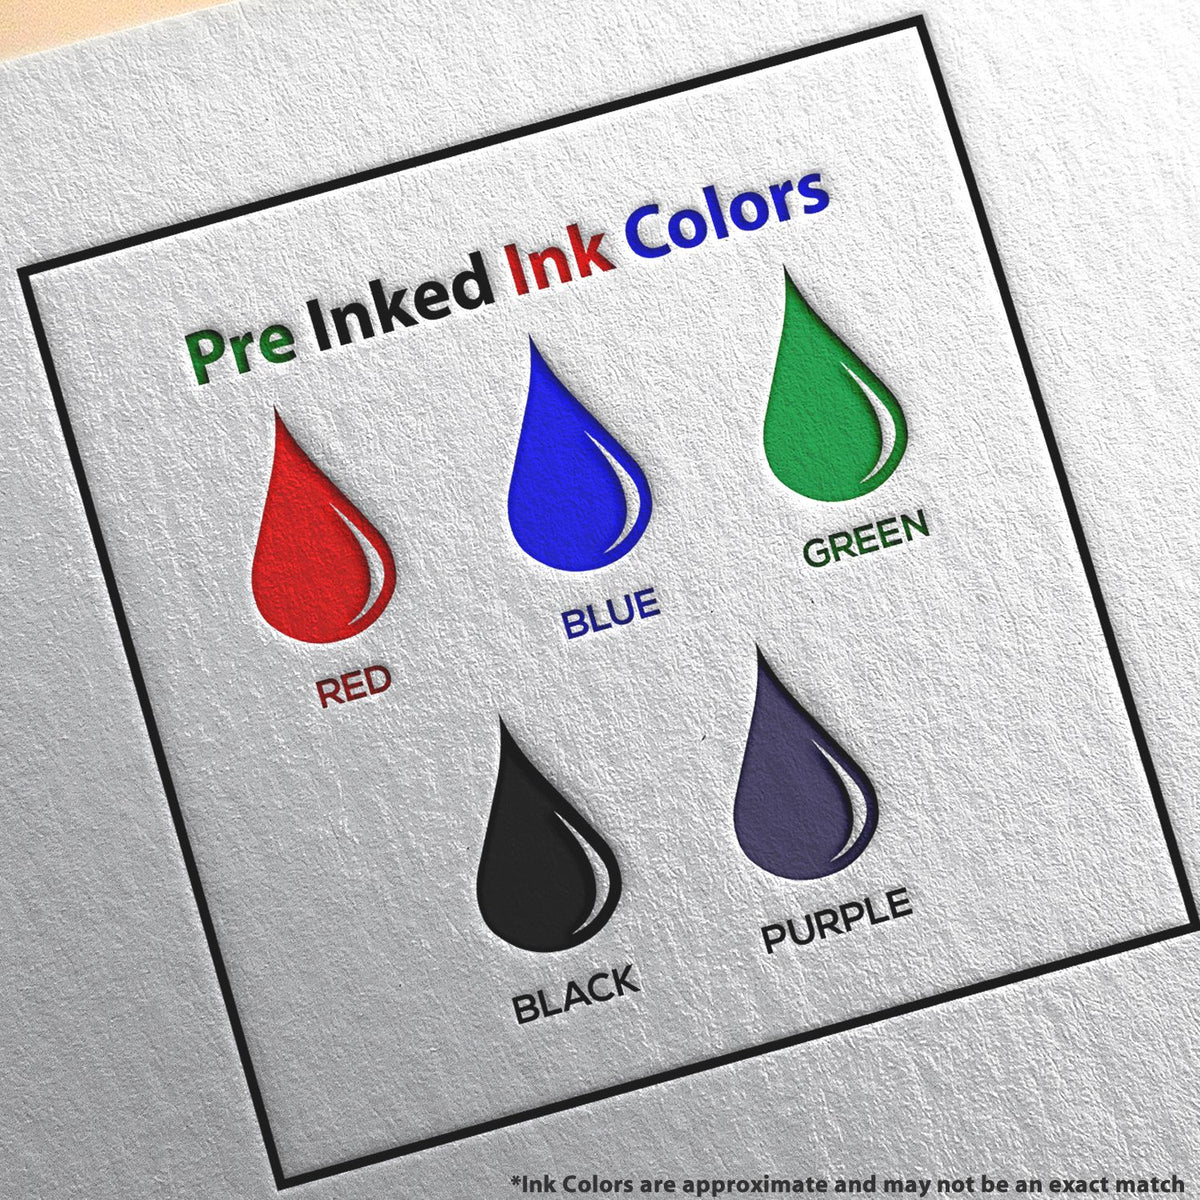 A picture showing the different ink colors or hues available for the Slim Pre-Inked Mississippi Professional Geologist Seal Stamp